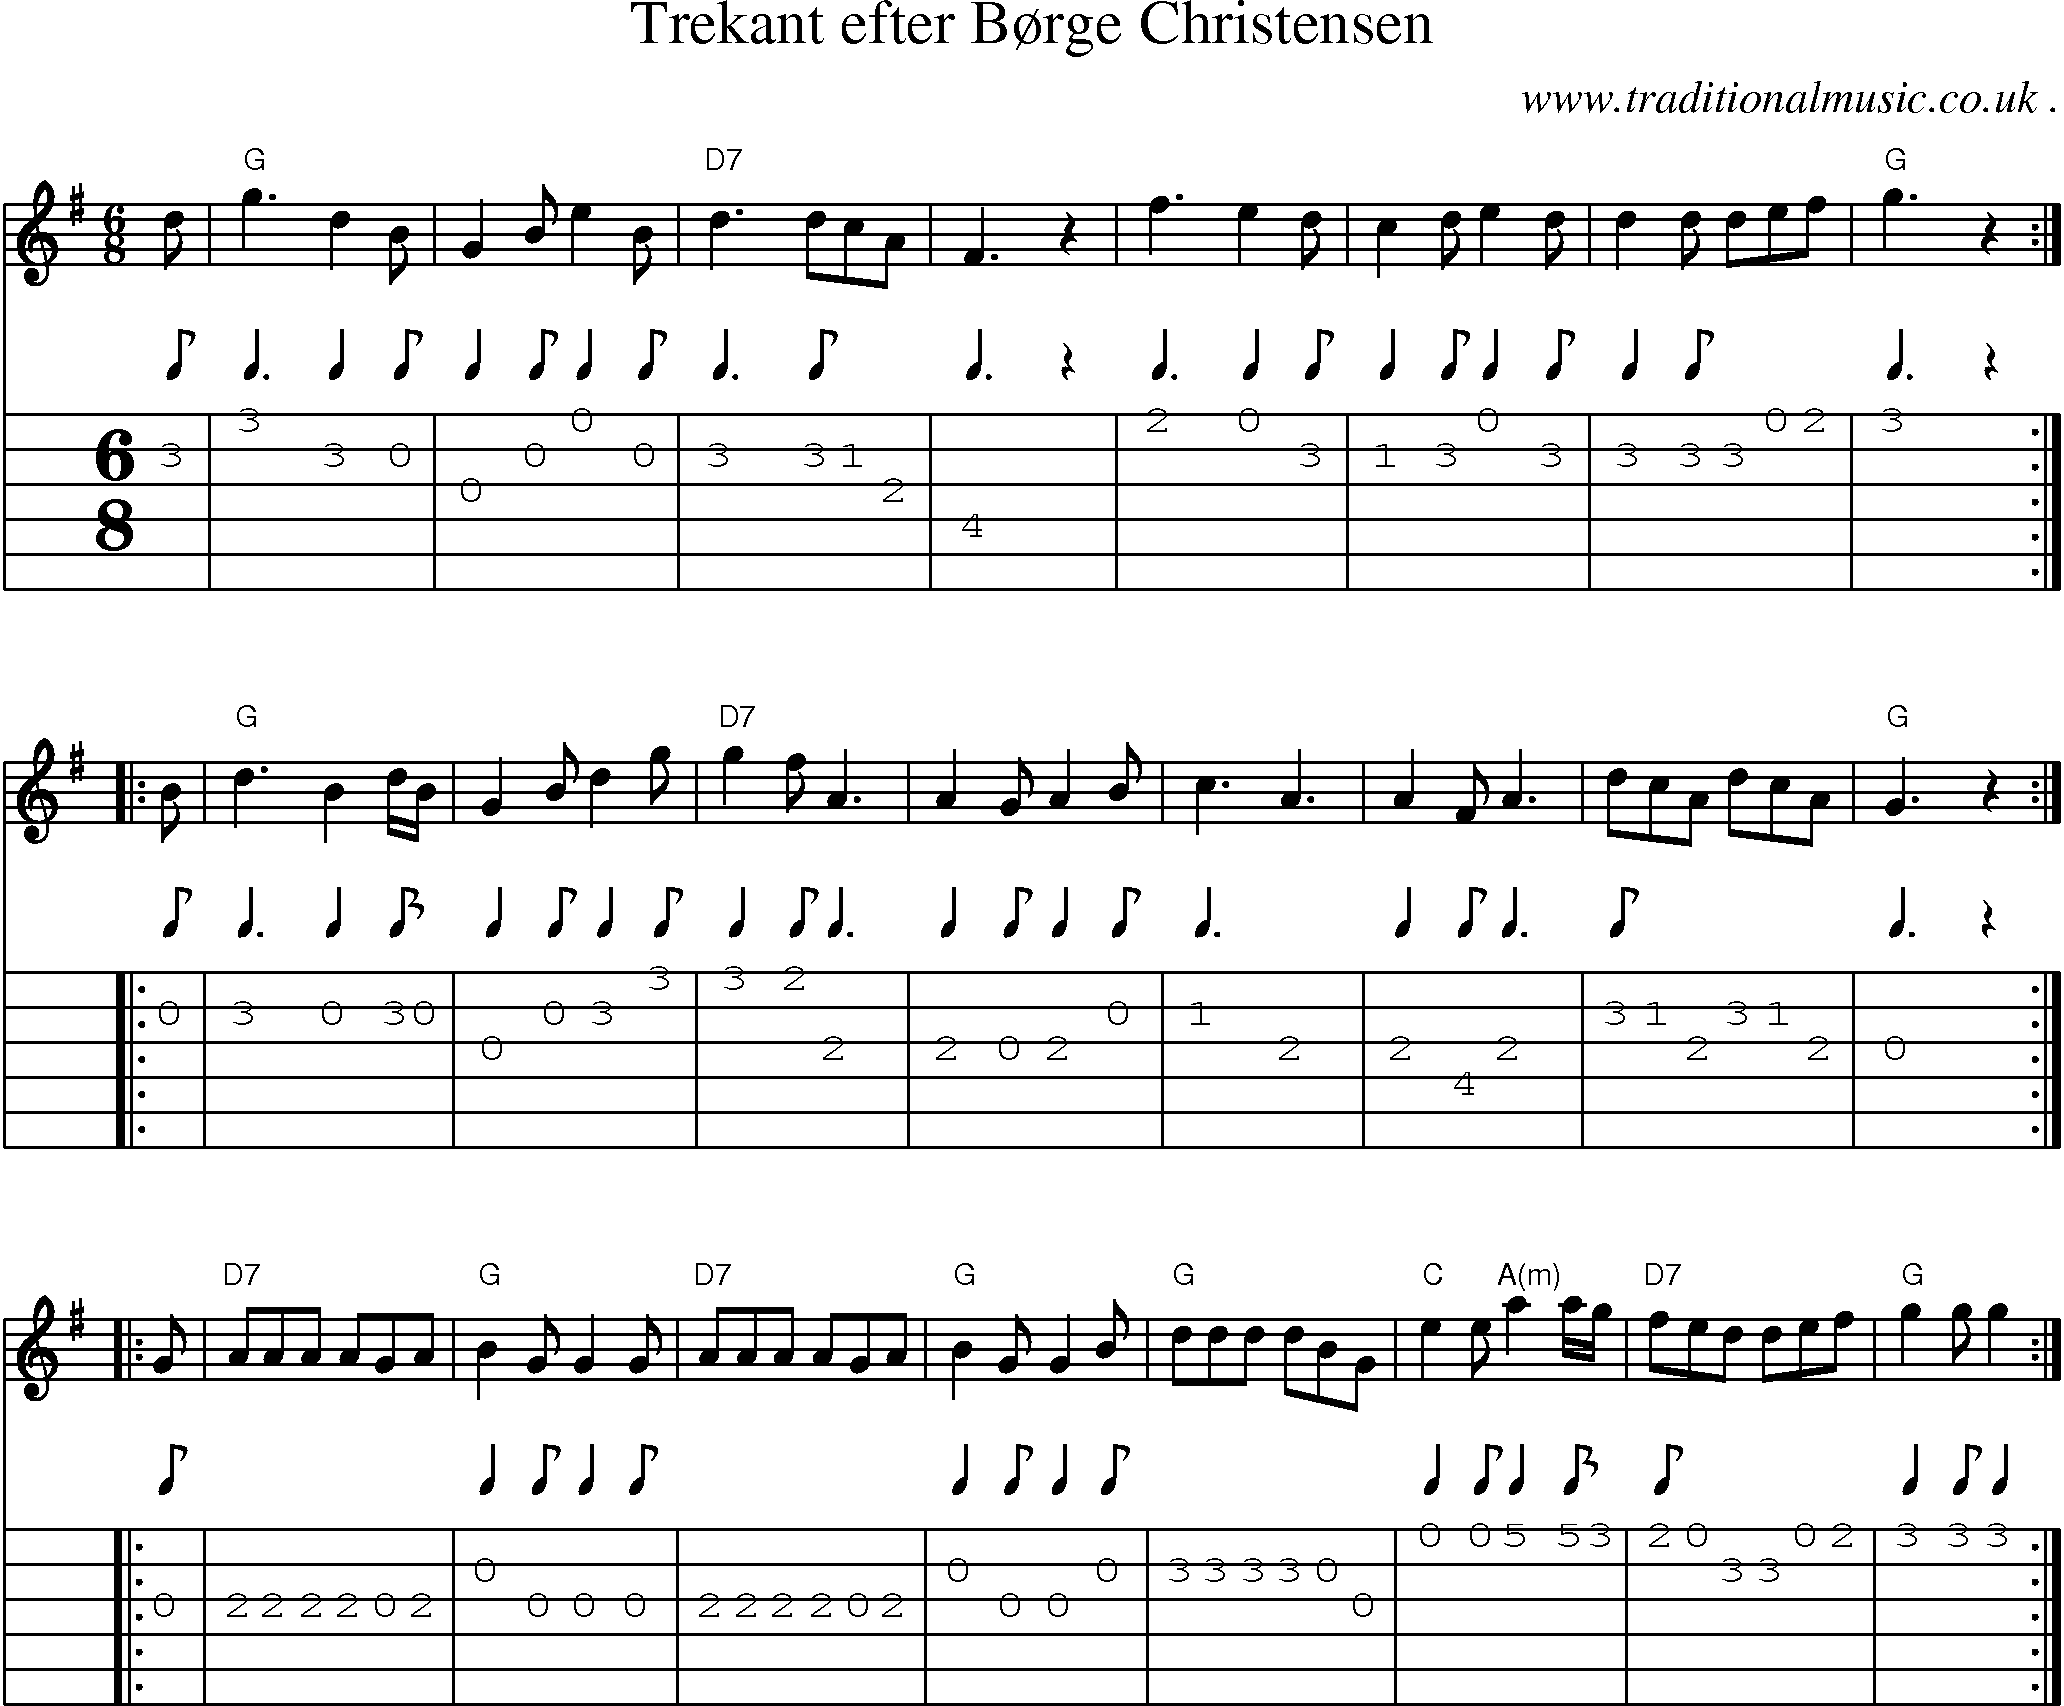 Sheet-music  score, Chords and Guitar Tabs for Trekant Efter Borge Christensen